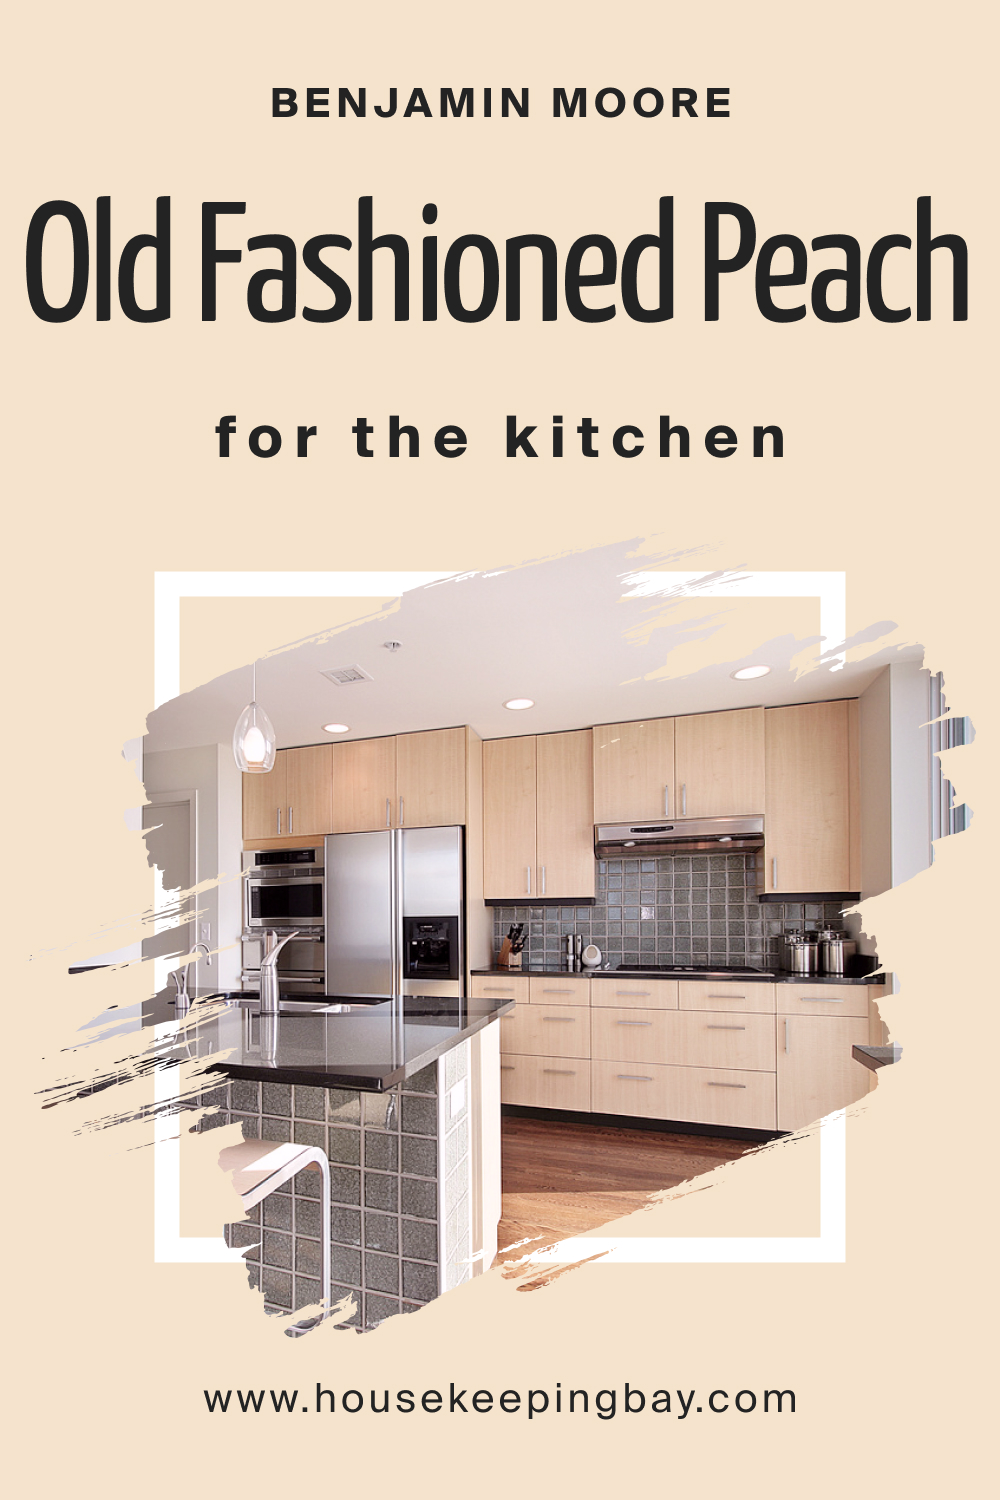 Benjamin Moore. Old Fashioned Peach OC 79 for the Kitchen